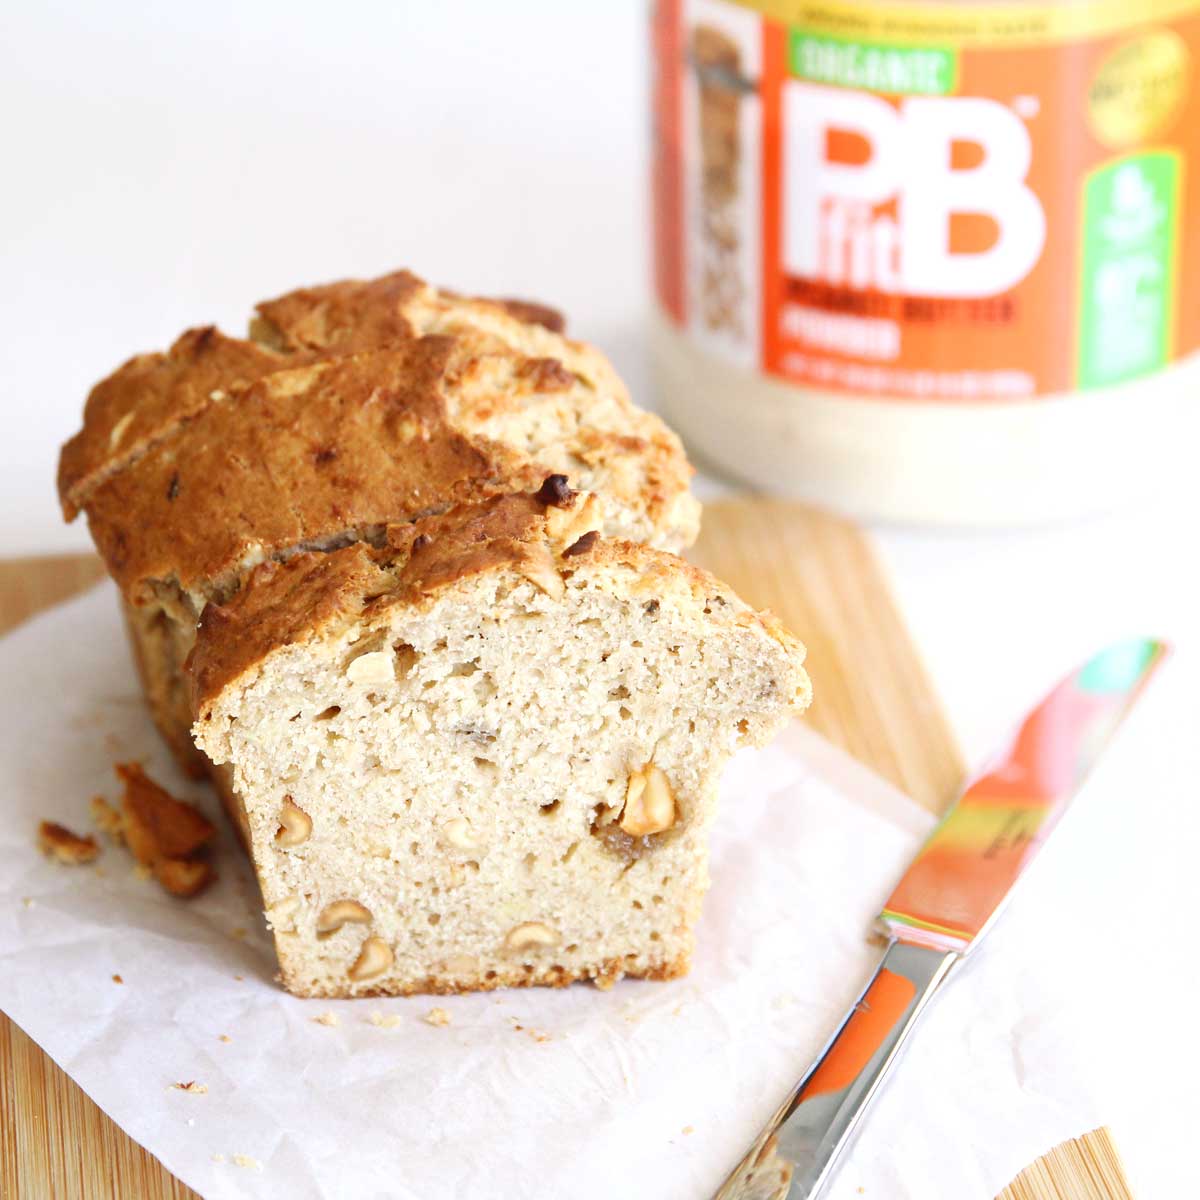 High Protein PB Fit Peanut Butter Banana Bread (Dairy Free, Egg Free Recipe) - Peppermint Whipped Cream